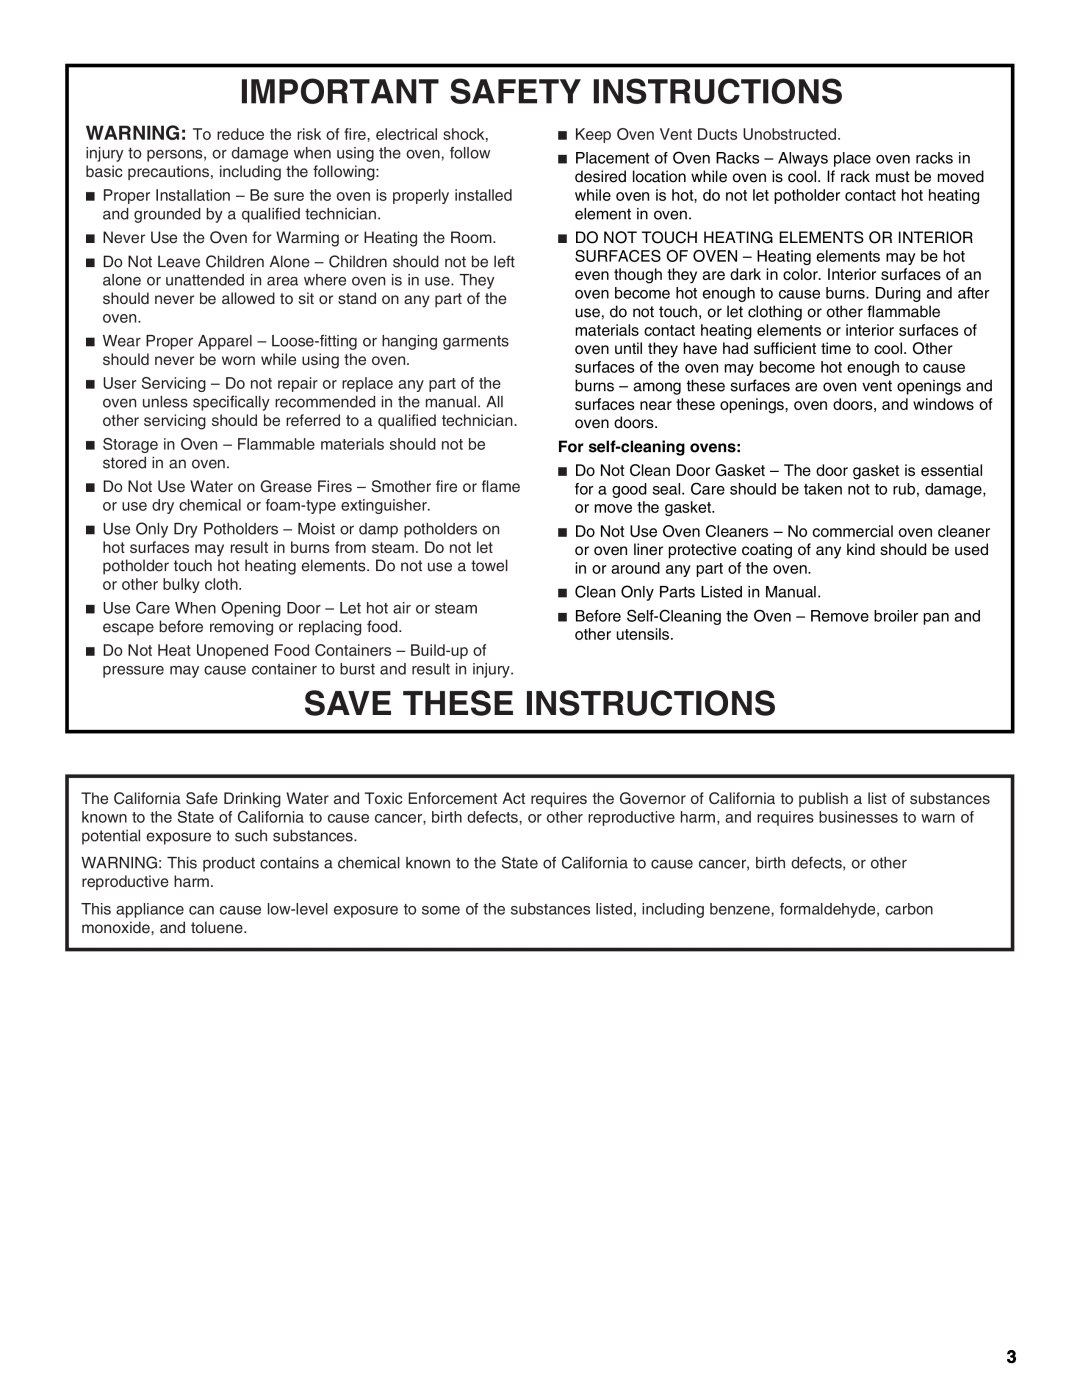 Whirlpool RBS275PV manual Important Safety Instructions, Save These Instructions, For self-cleaningovens 